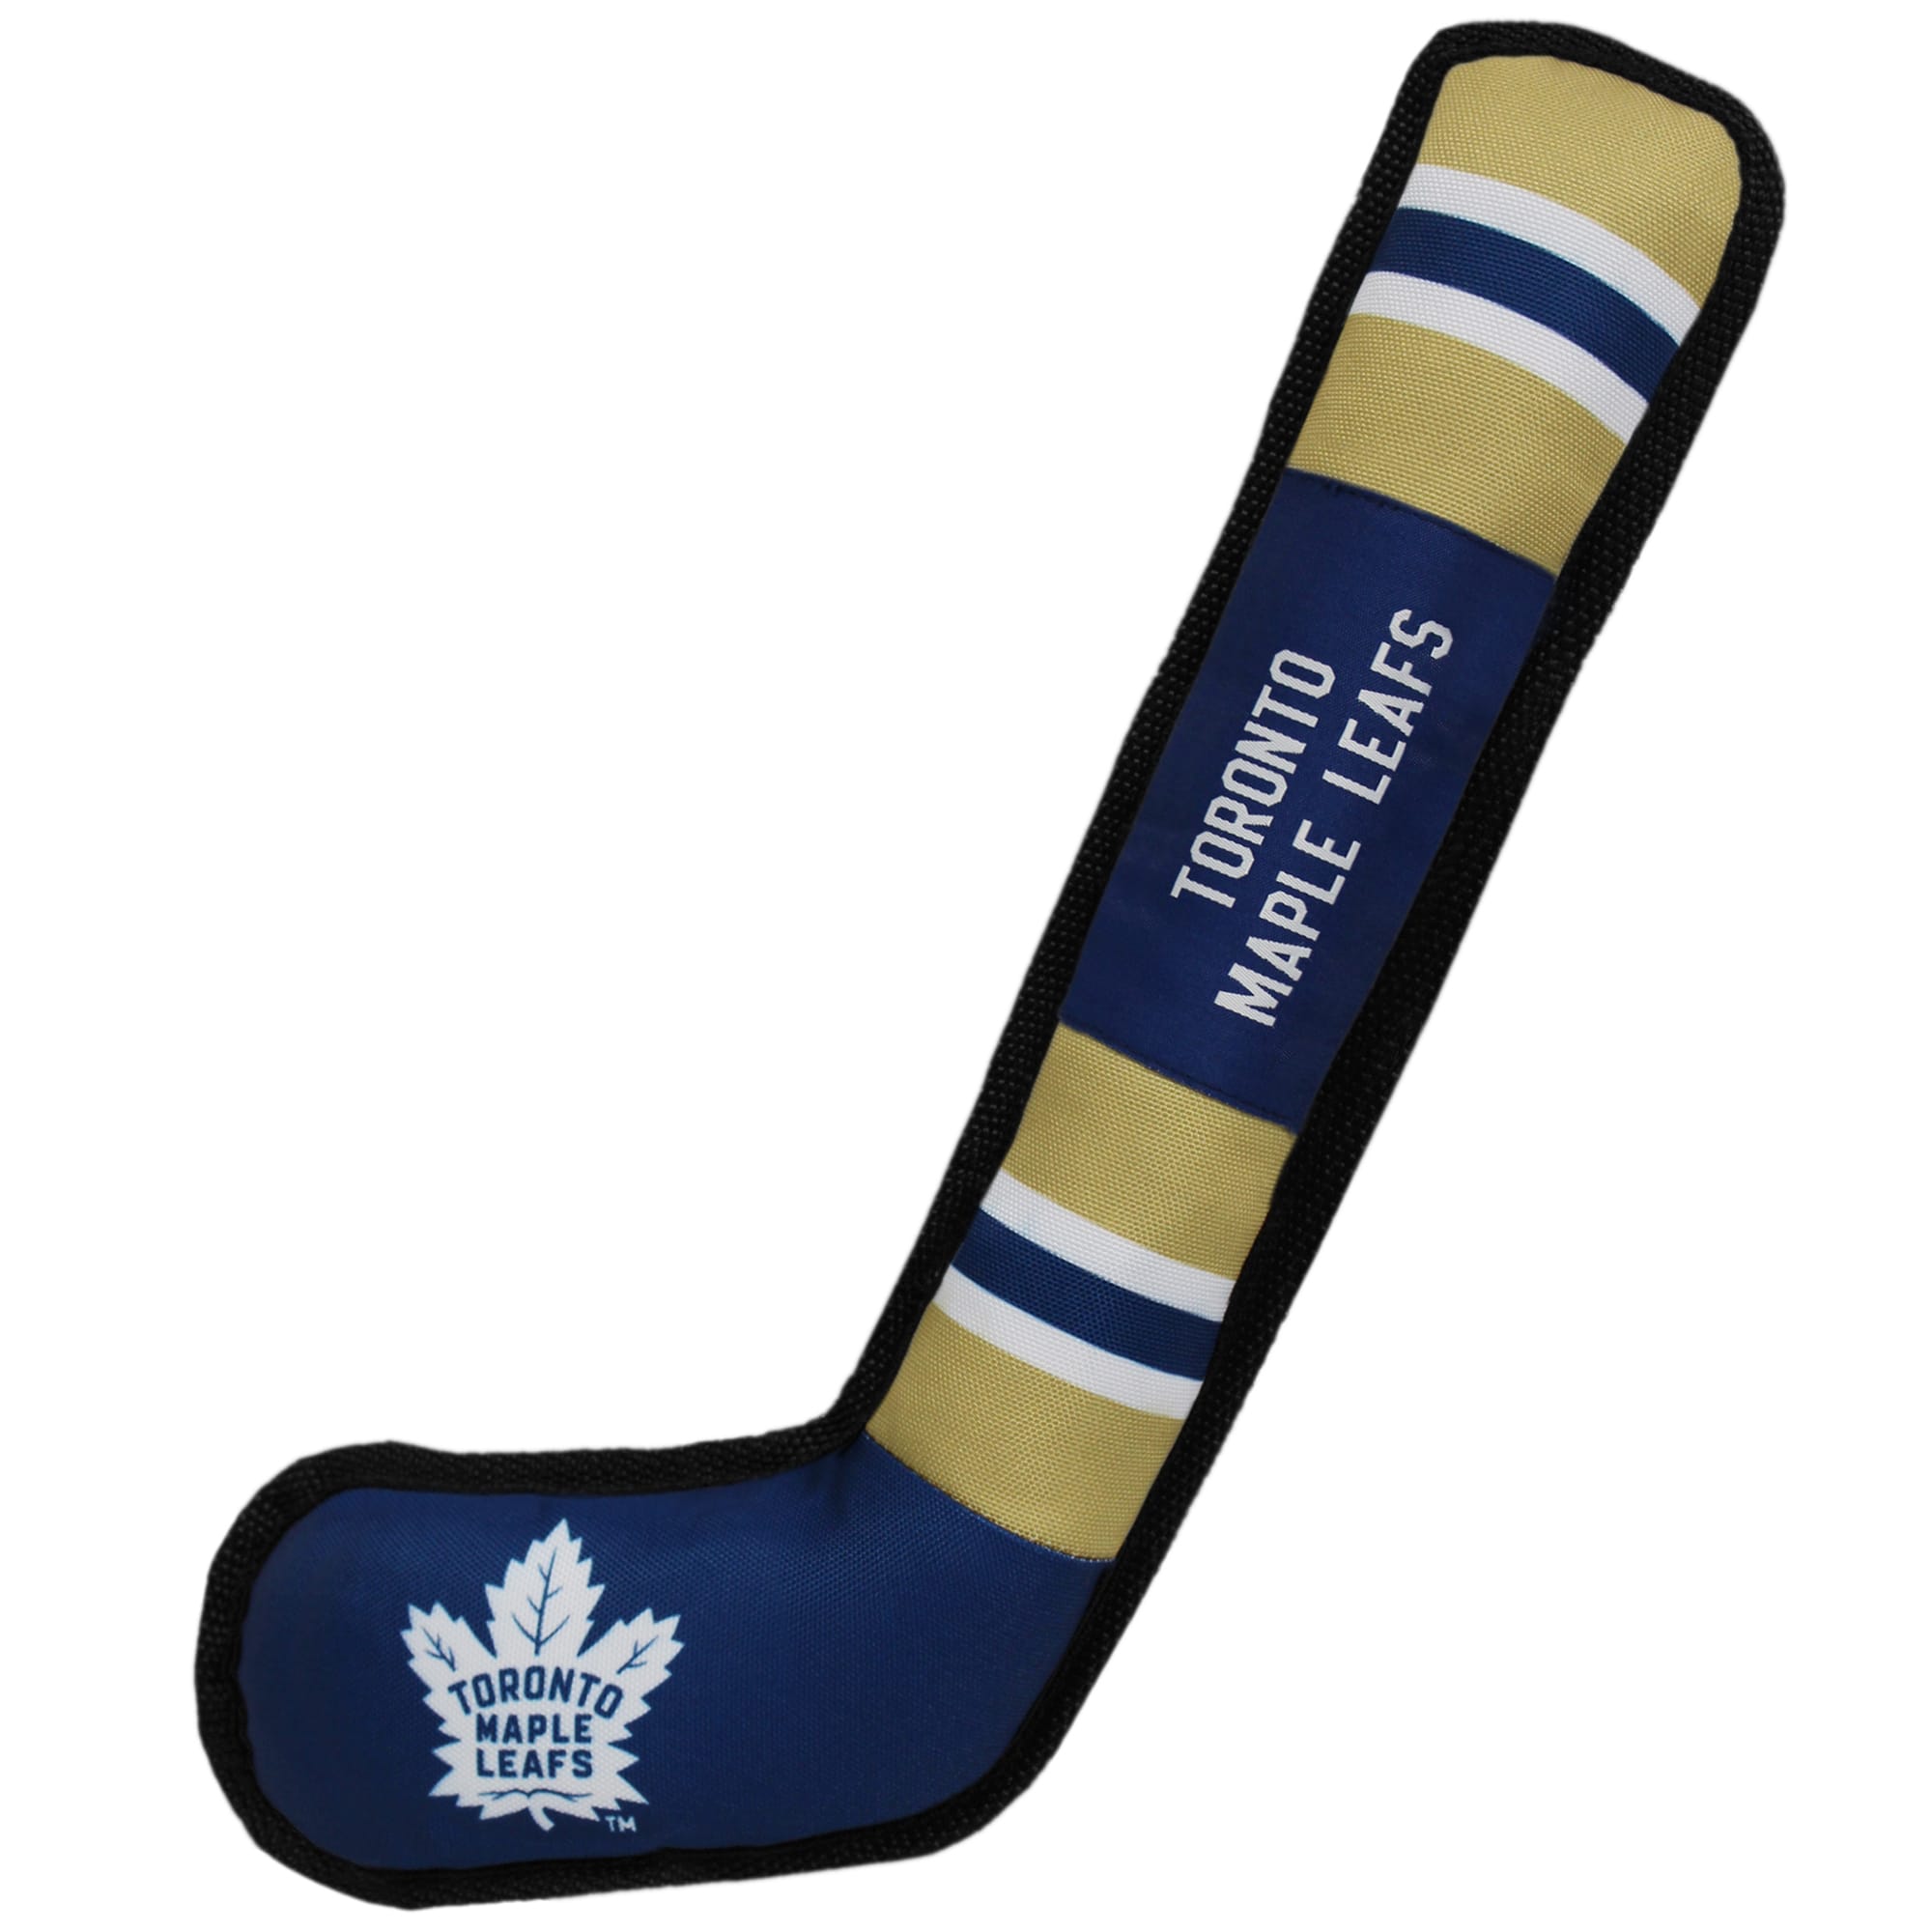 Pets First Toronto Maple Leafs Hockey Stick Toy for Dogs, X-Large